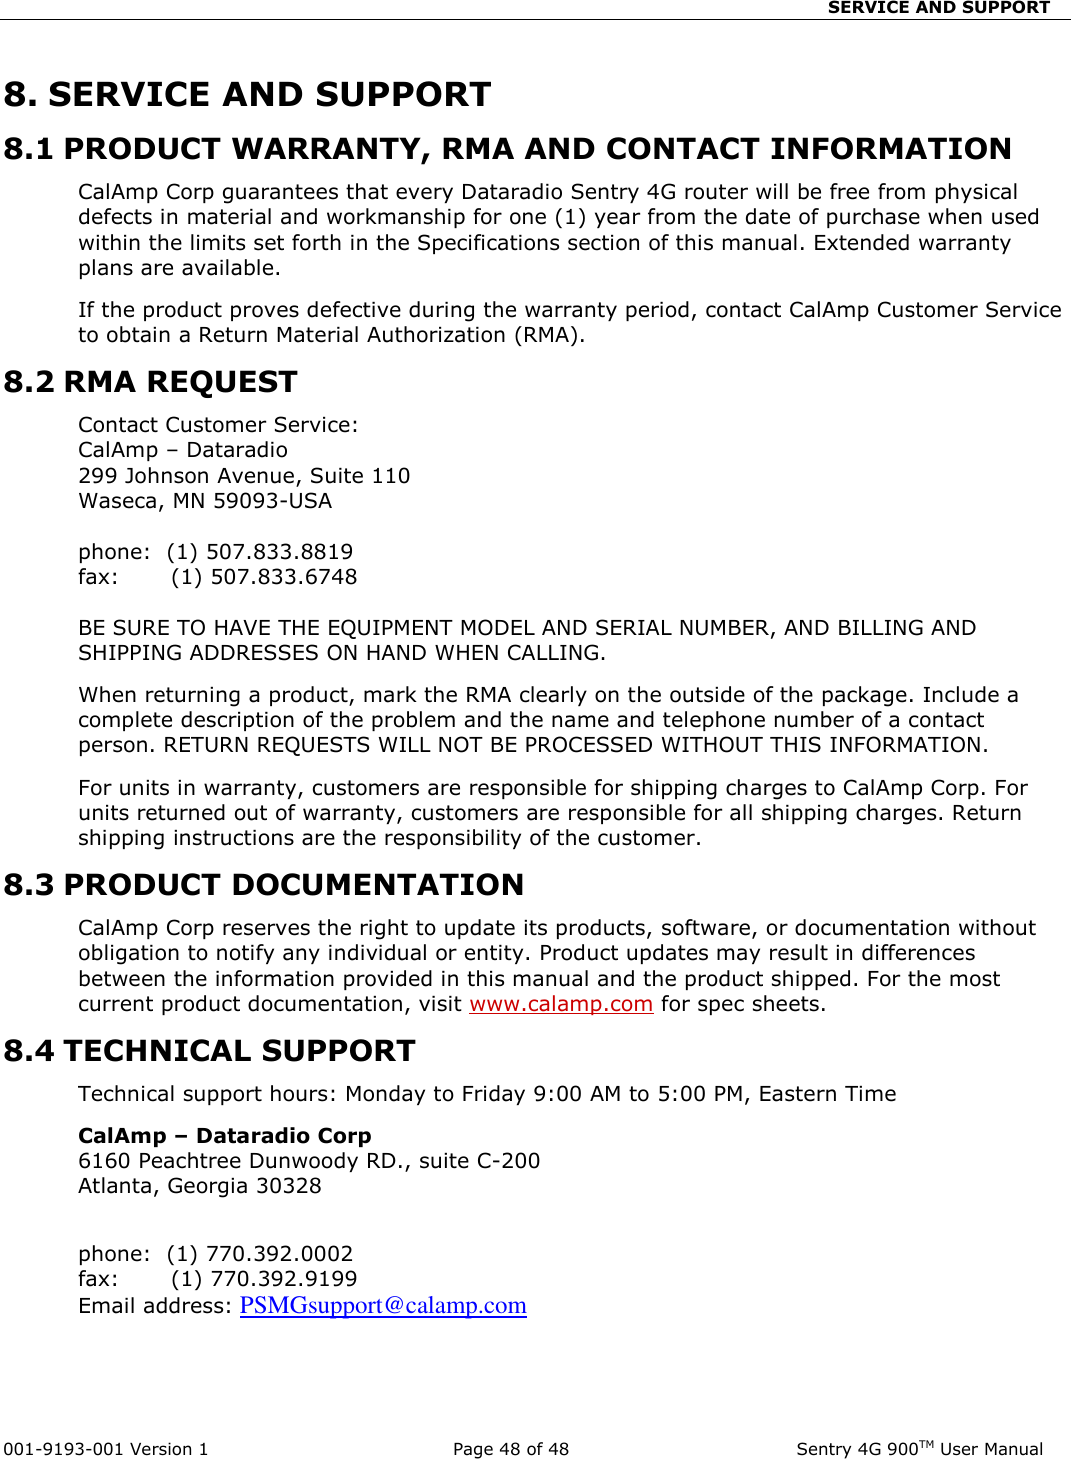                                SERVICE AND SUPPORT  001-9193-001 Version 1              Page 48 of 48               Sentry 4G 900TM User Manual 8. SERVICE AND SUPPORT 8.1 PRODUCT WARRANTY, RMA AND CONTACT INFORMATION CalAmp Corp guarantees that every Dataradio Sentry 4G router will be free from physical defects in material and workmanship for one (1) year from the date of purchase when used within the limits set forth in the Specifications section of this manual. Extended warranty plans are available.  If the product proves defective during the warranty period, contact CalAmp Customer Service to obtain a Return Material Authorization (RMA).  8.2 RMA REQUEST Contact Customer Service: CalAmp – Dataradio  299 Johnson Avenue, Suite 110 Waseca, MN 59093-USA  phone:  (1) 507.833.8819                                                                                           fax:       (1) 507.833.6748                                                                                                     BE SURE TO HAVE THE EQUIPMENT MODEL AND SERIAL NUMBER, AND BILLING AND SHIPPING ADDRESSES ON HAND WHEN CALLING.  When returning a product, mark the RMA clearly on the outside of the package. Include a complete description of the problem and the name and telephone number of a contact person. RETURN REQUESTS WILL NOT BE PROCESSED WITHOUT THIS INFORMATION. For units in warranty, customers are responsible for shipping charges to CalAmp Corp. For units returned out of warranty, customers are responsible for all shipping charges. Return shipping instructions are the responsibility of the customer. 8.3 PRODUCT DOCUMENTATION CalAmp Corp reserves the right to update its products, software, or documentation without obligation to notify any individual or entity. Product updates may result in differences between the information provided in this manual and the product shipped. For the most current product documentation, visit www.calamp.com for spec sheets. 8.4 TECHNICAL SUPPORT Technical support hours: Monday to Friday 9:00 AM to 5:00 PM, Eastern Time CalAmp – Dataradio Corp                                                                                             6160 Peachtree Dunwoody RD., suite C-200                                                                           Atlanta, Georgia 30328                                                                                                                                      phone:  (1) 770.392.0002                                                                                            fax:       (1) 770.392.9199                                                                                                   Email address: PSMGsupport@calamp.com       